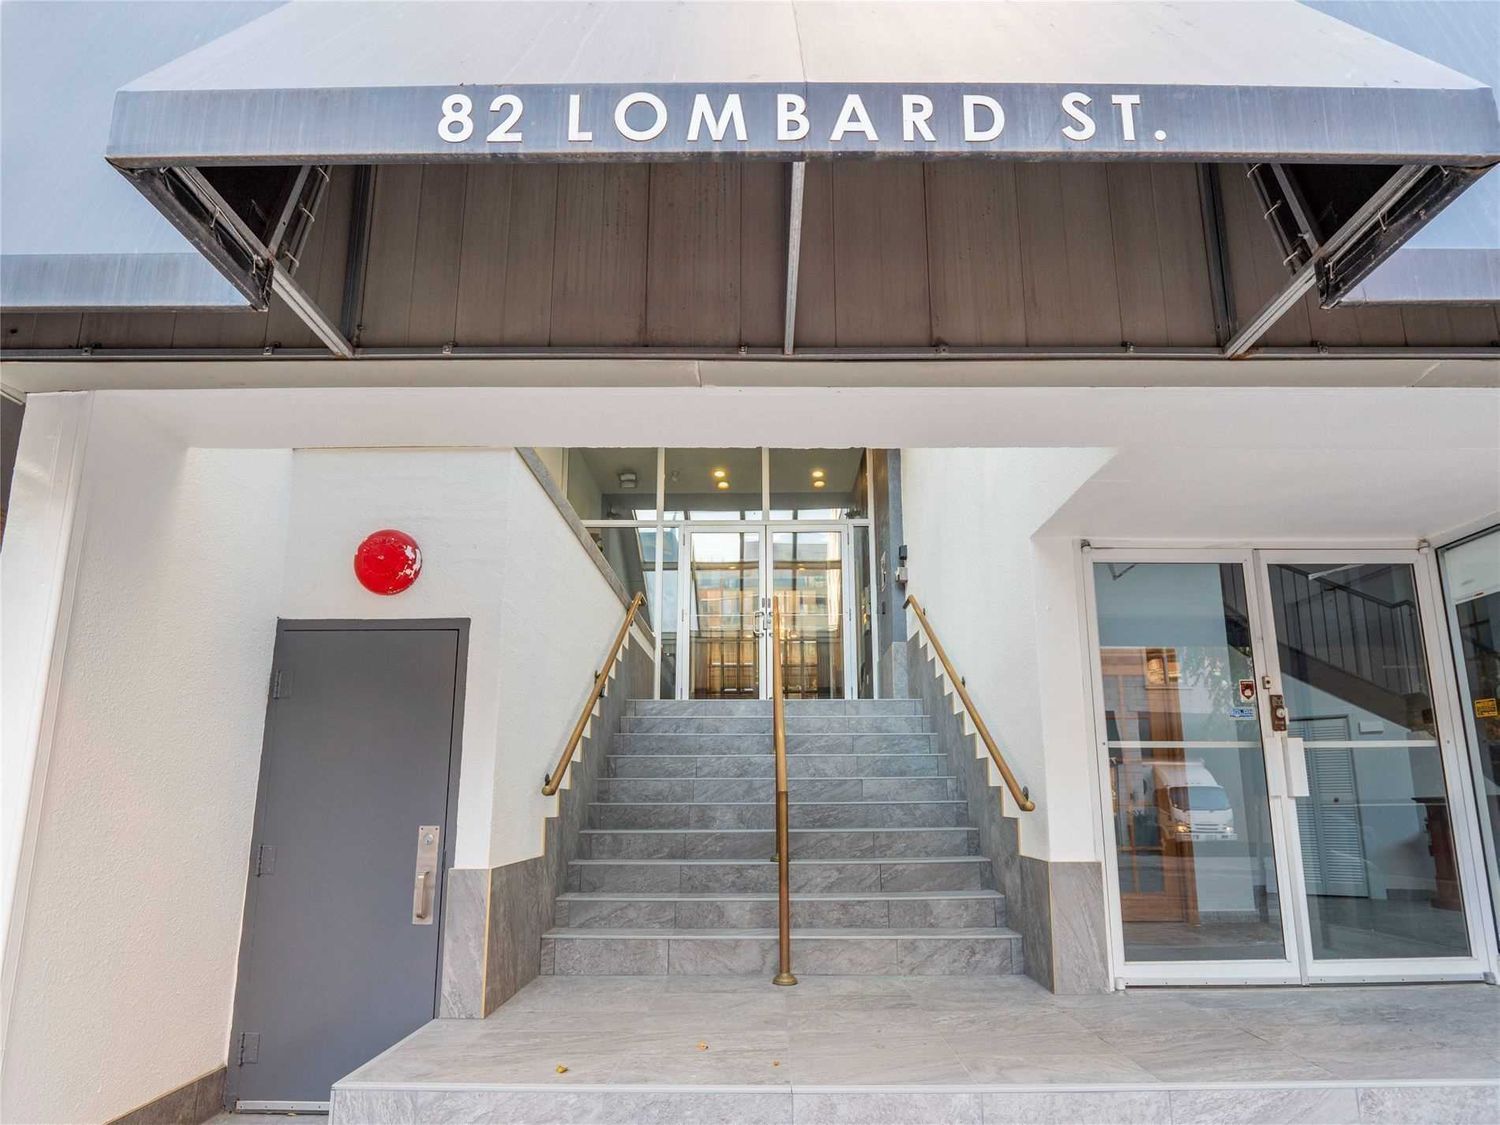 82 Lombard Street. Lombard Court Condos is located in  Downtown, Toronto - image #2 of 3